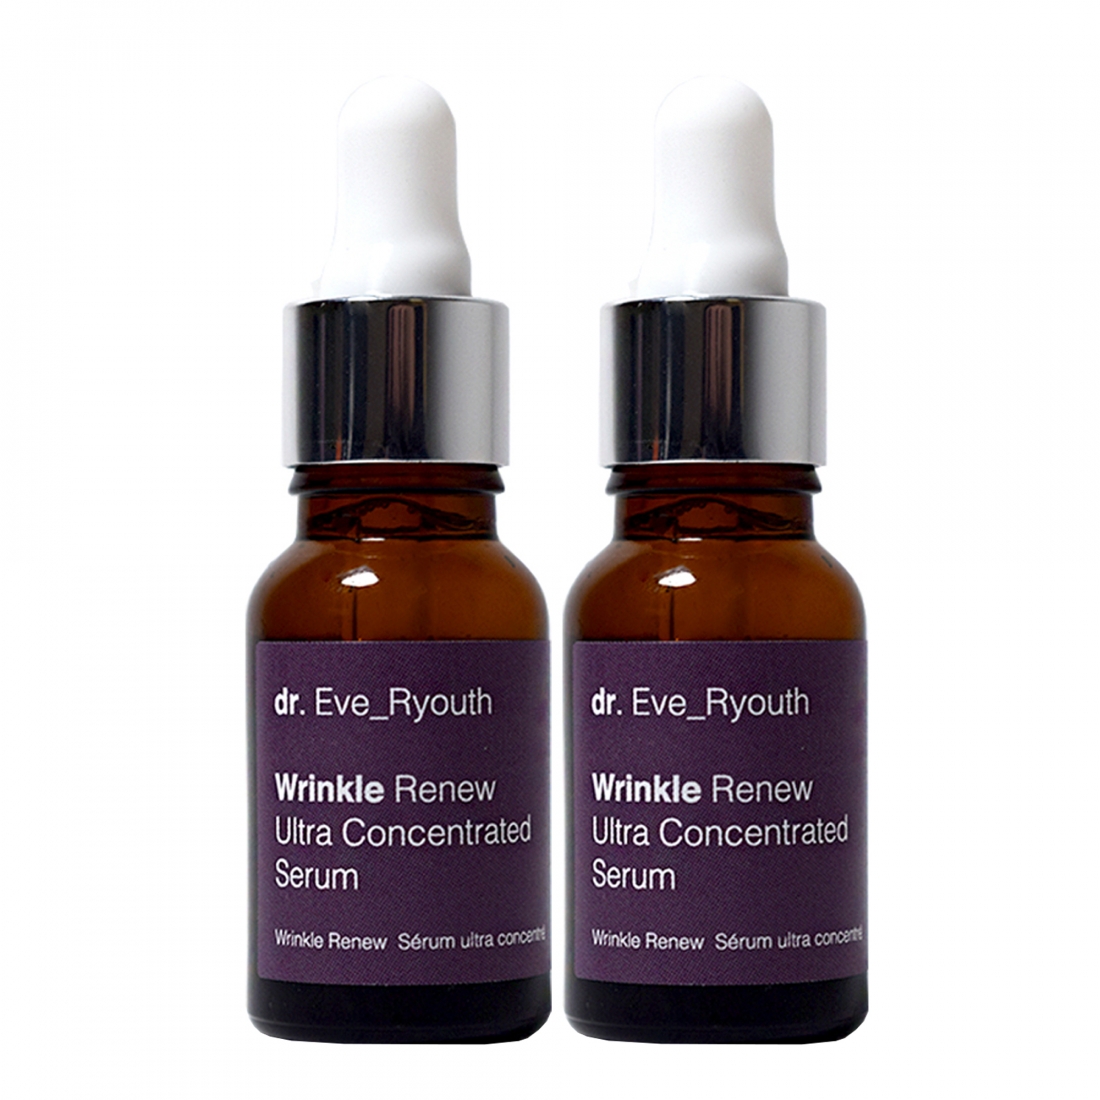 'Wrinkle Renew Ultra Concentrated' Anti-Aging Serum - 15 ml, 2 Pieces